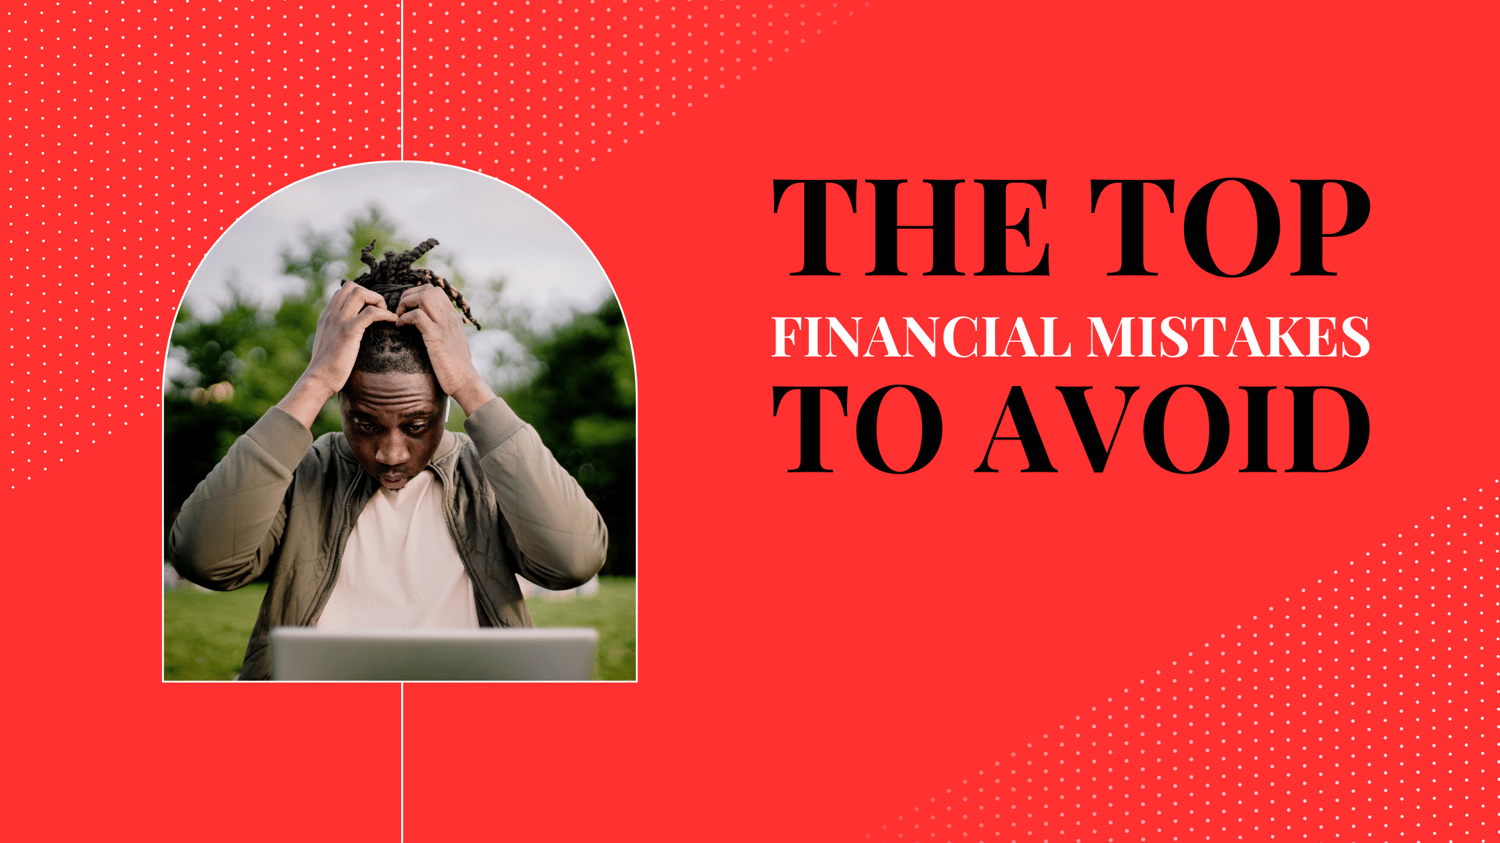 THE TOP FINANCIAL MISTAKES TO AVOID